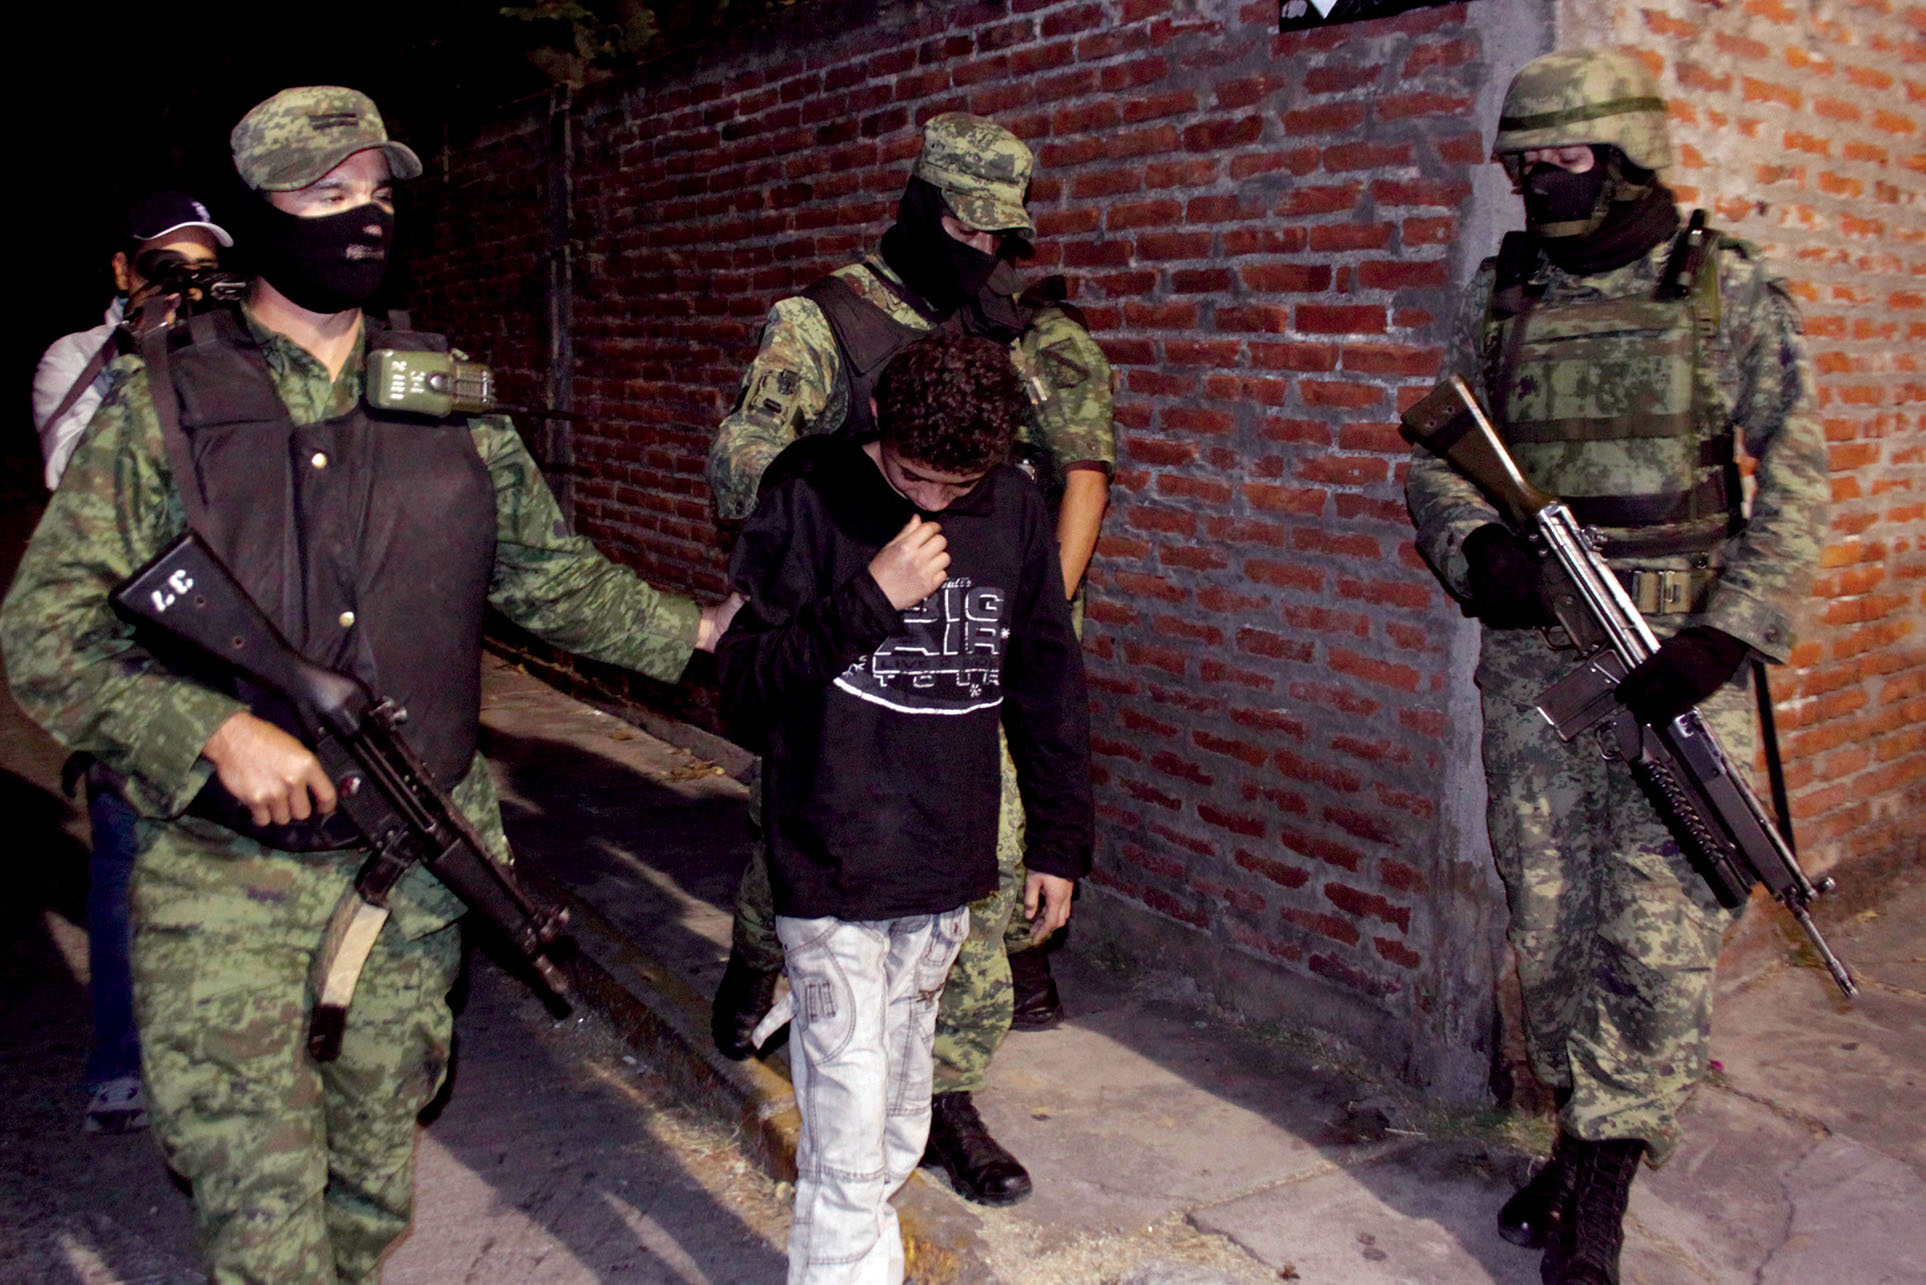 Soldiers transport a 14-year-old U.S. citizen accused of four beheadings in the streets in Mexico. (Photo by Antonio Sierra/Associated Press.)